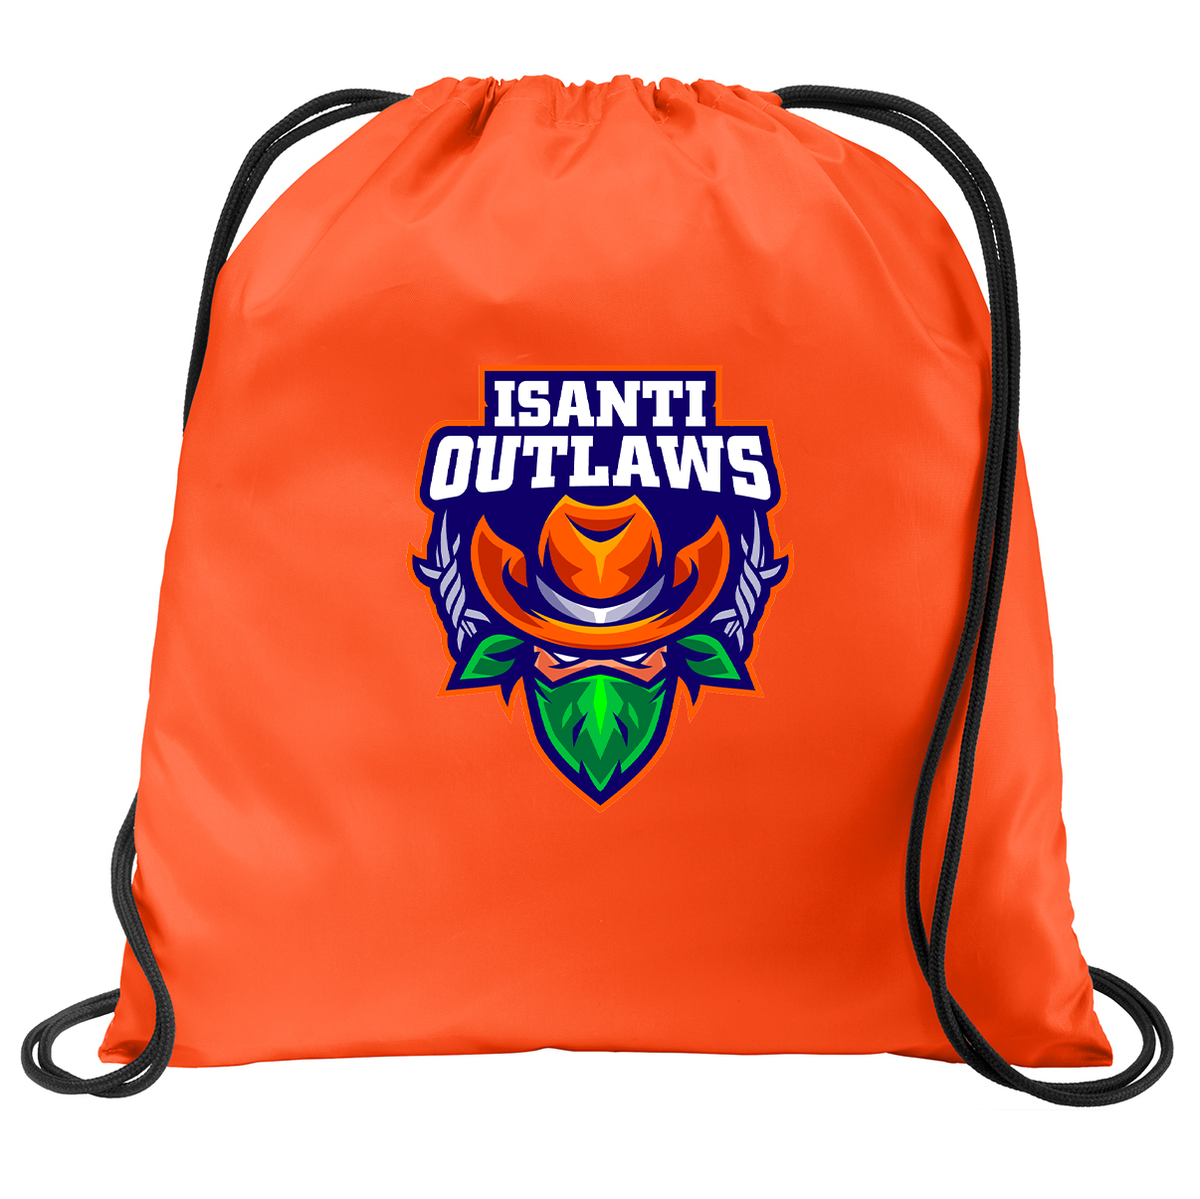 Isanti Outlaws Cinch Pack